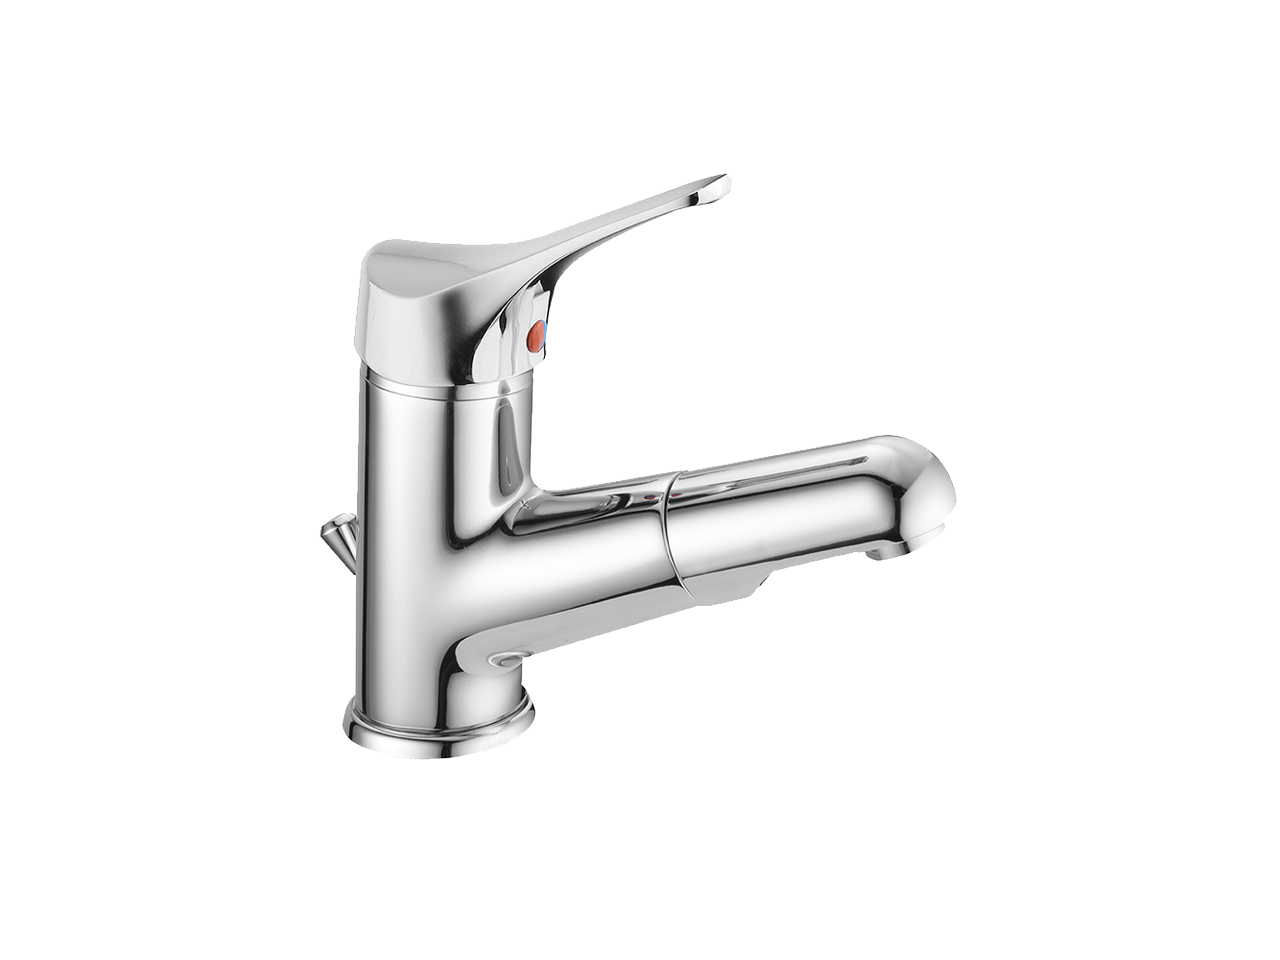 S.L. washbasin mixer with pull-out handspray BACCARAT - v1